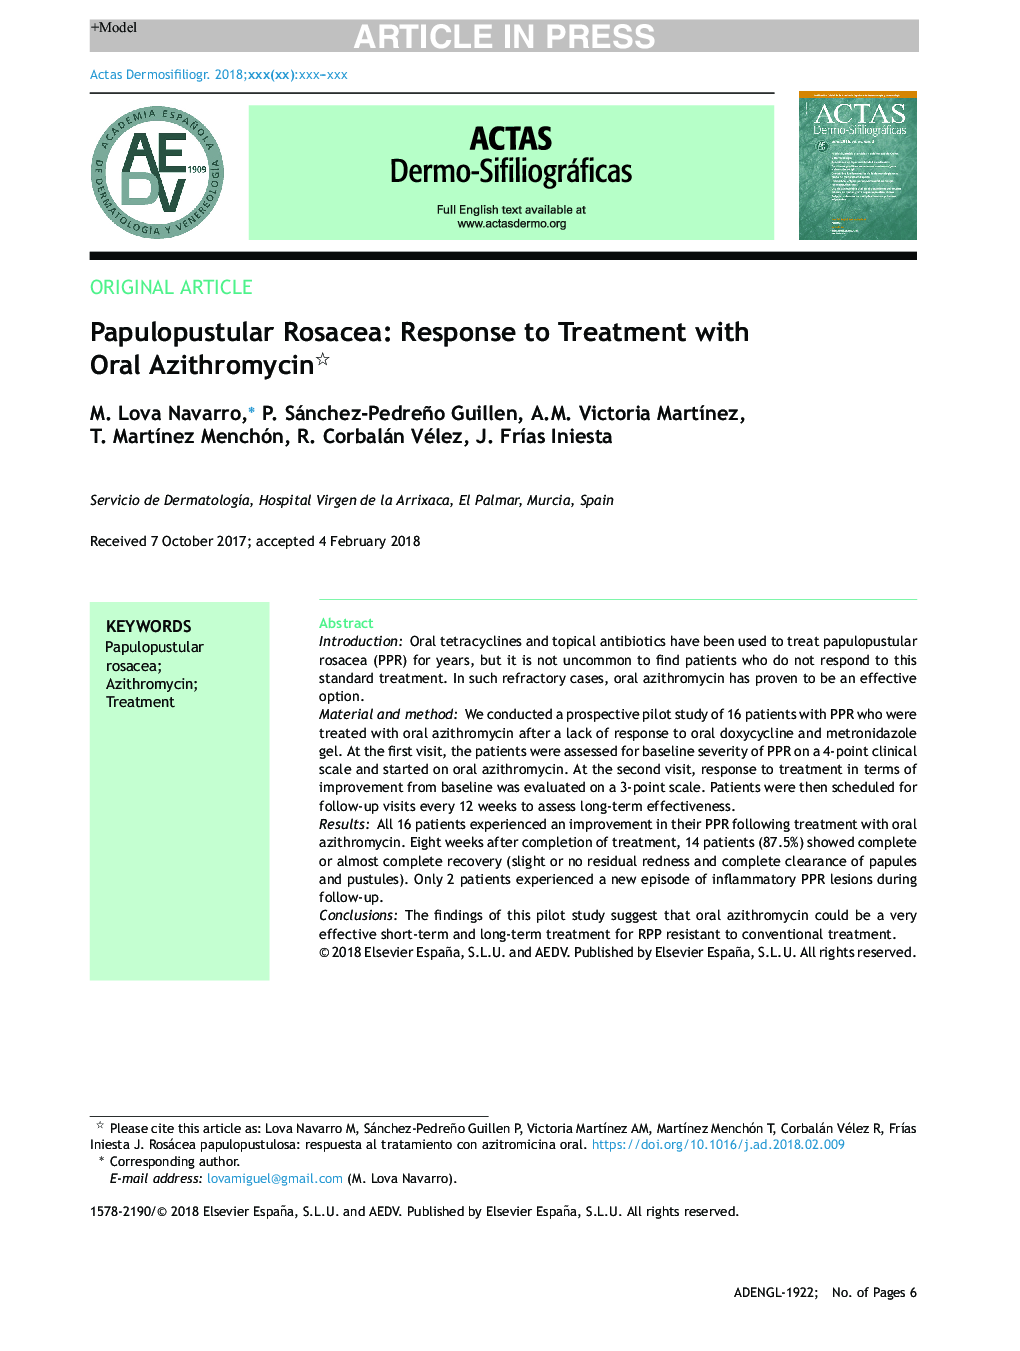 Papulopustular Rosacea: Response to Treatment with Oral Azithromycin